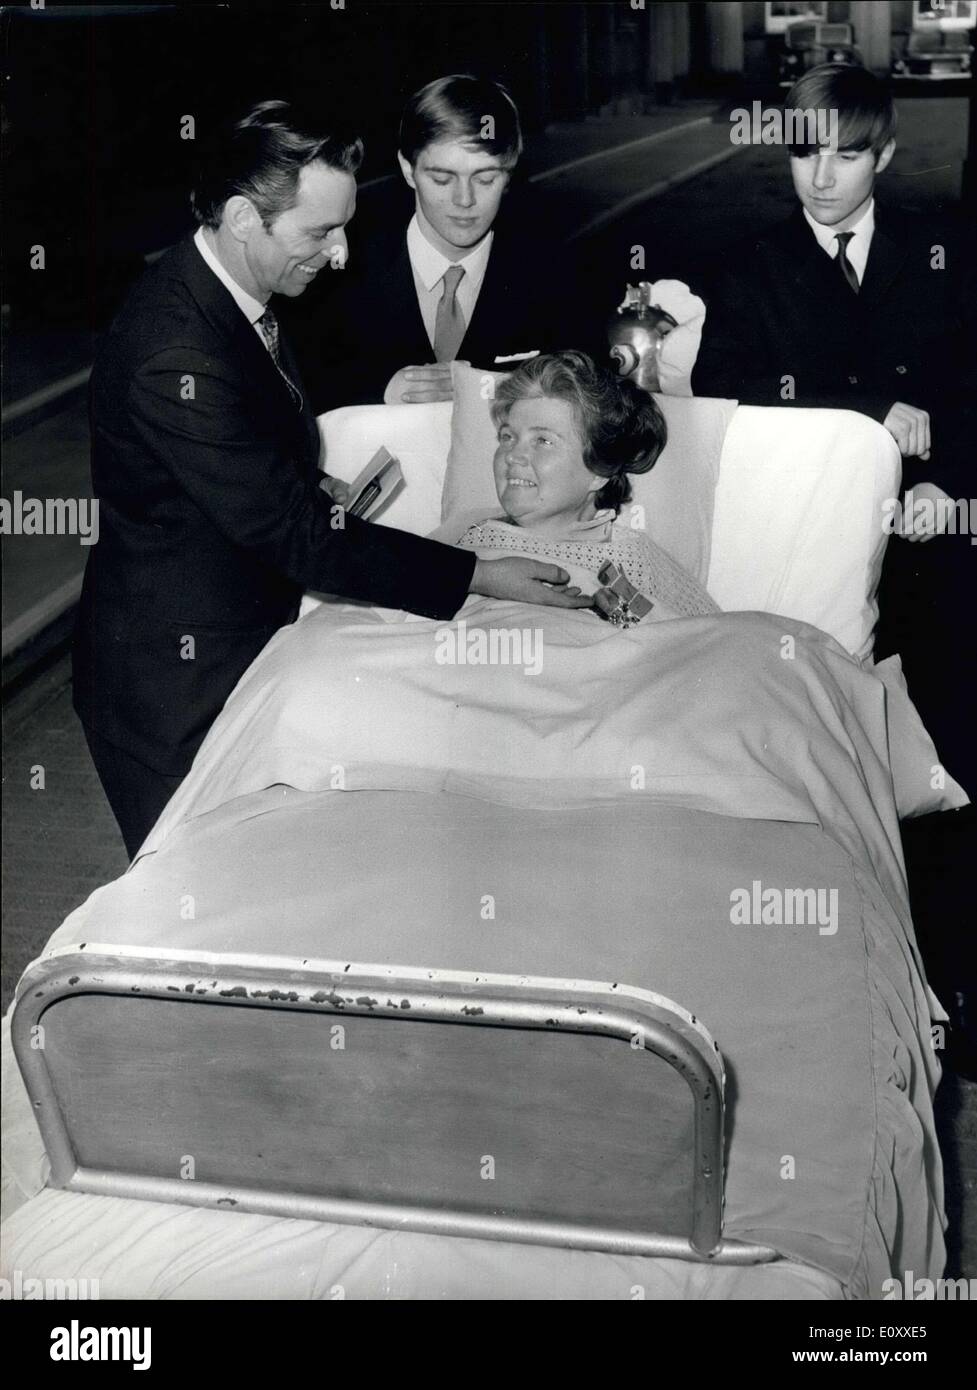 Mar. 12, 1968 - March 12, 1968 Mrs. Doris Page receives the MBE. Mrs. Doris Page, 42, is pictured in a bed in the quadrangle of Buckingham Palace today, showing her husband Kenneth, and her two sons, Brian 17, and Andrew 15, the MBE which was presented to her by Queen Elizabeth II. Mrs. Page, of Essex Street, Newbury, Berkshire, England, is a polio victim and uses an iron lung, received her award for her work as editor of the magazine Responaut for people living by breathing apparatus. Stock Photo